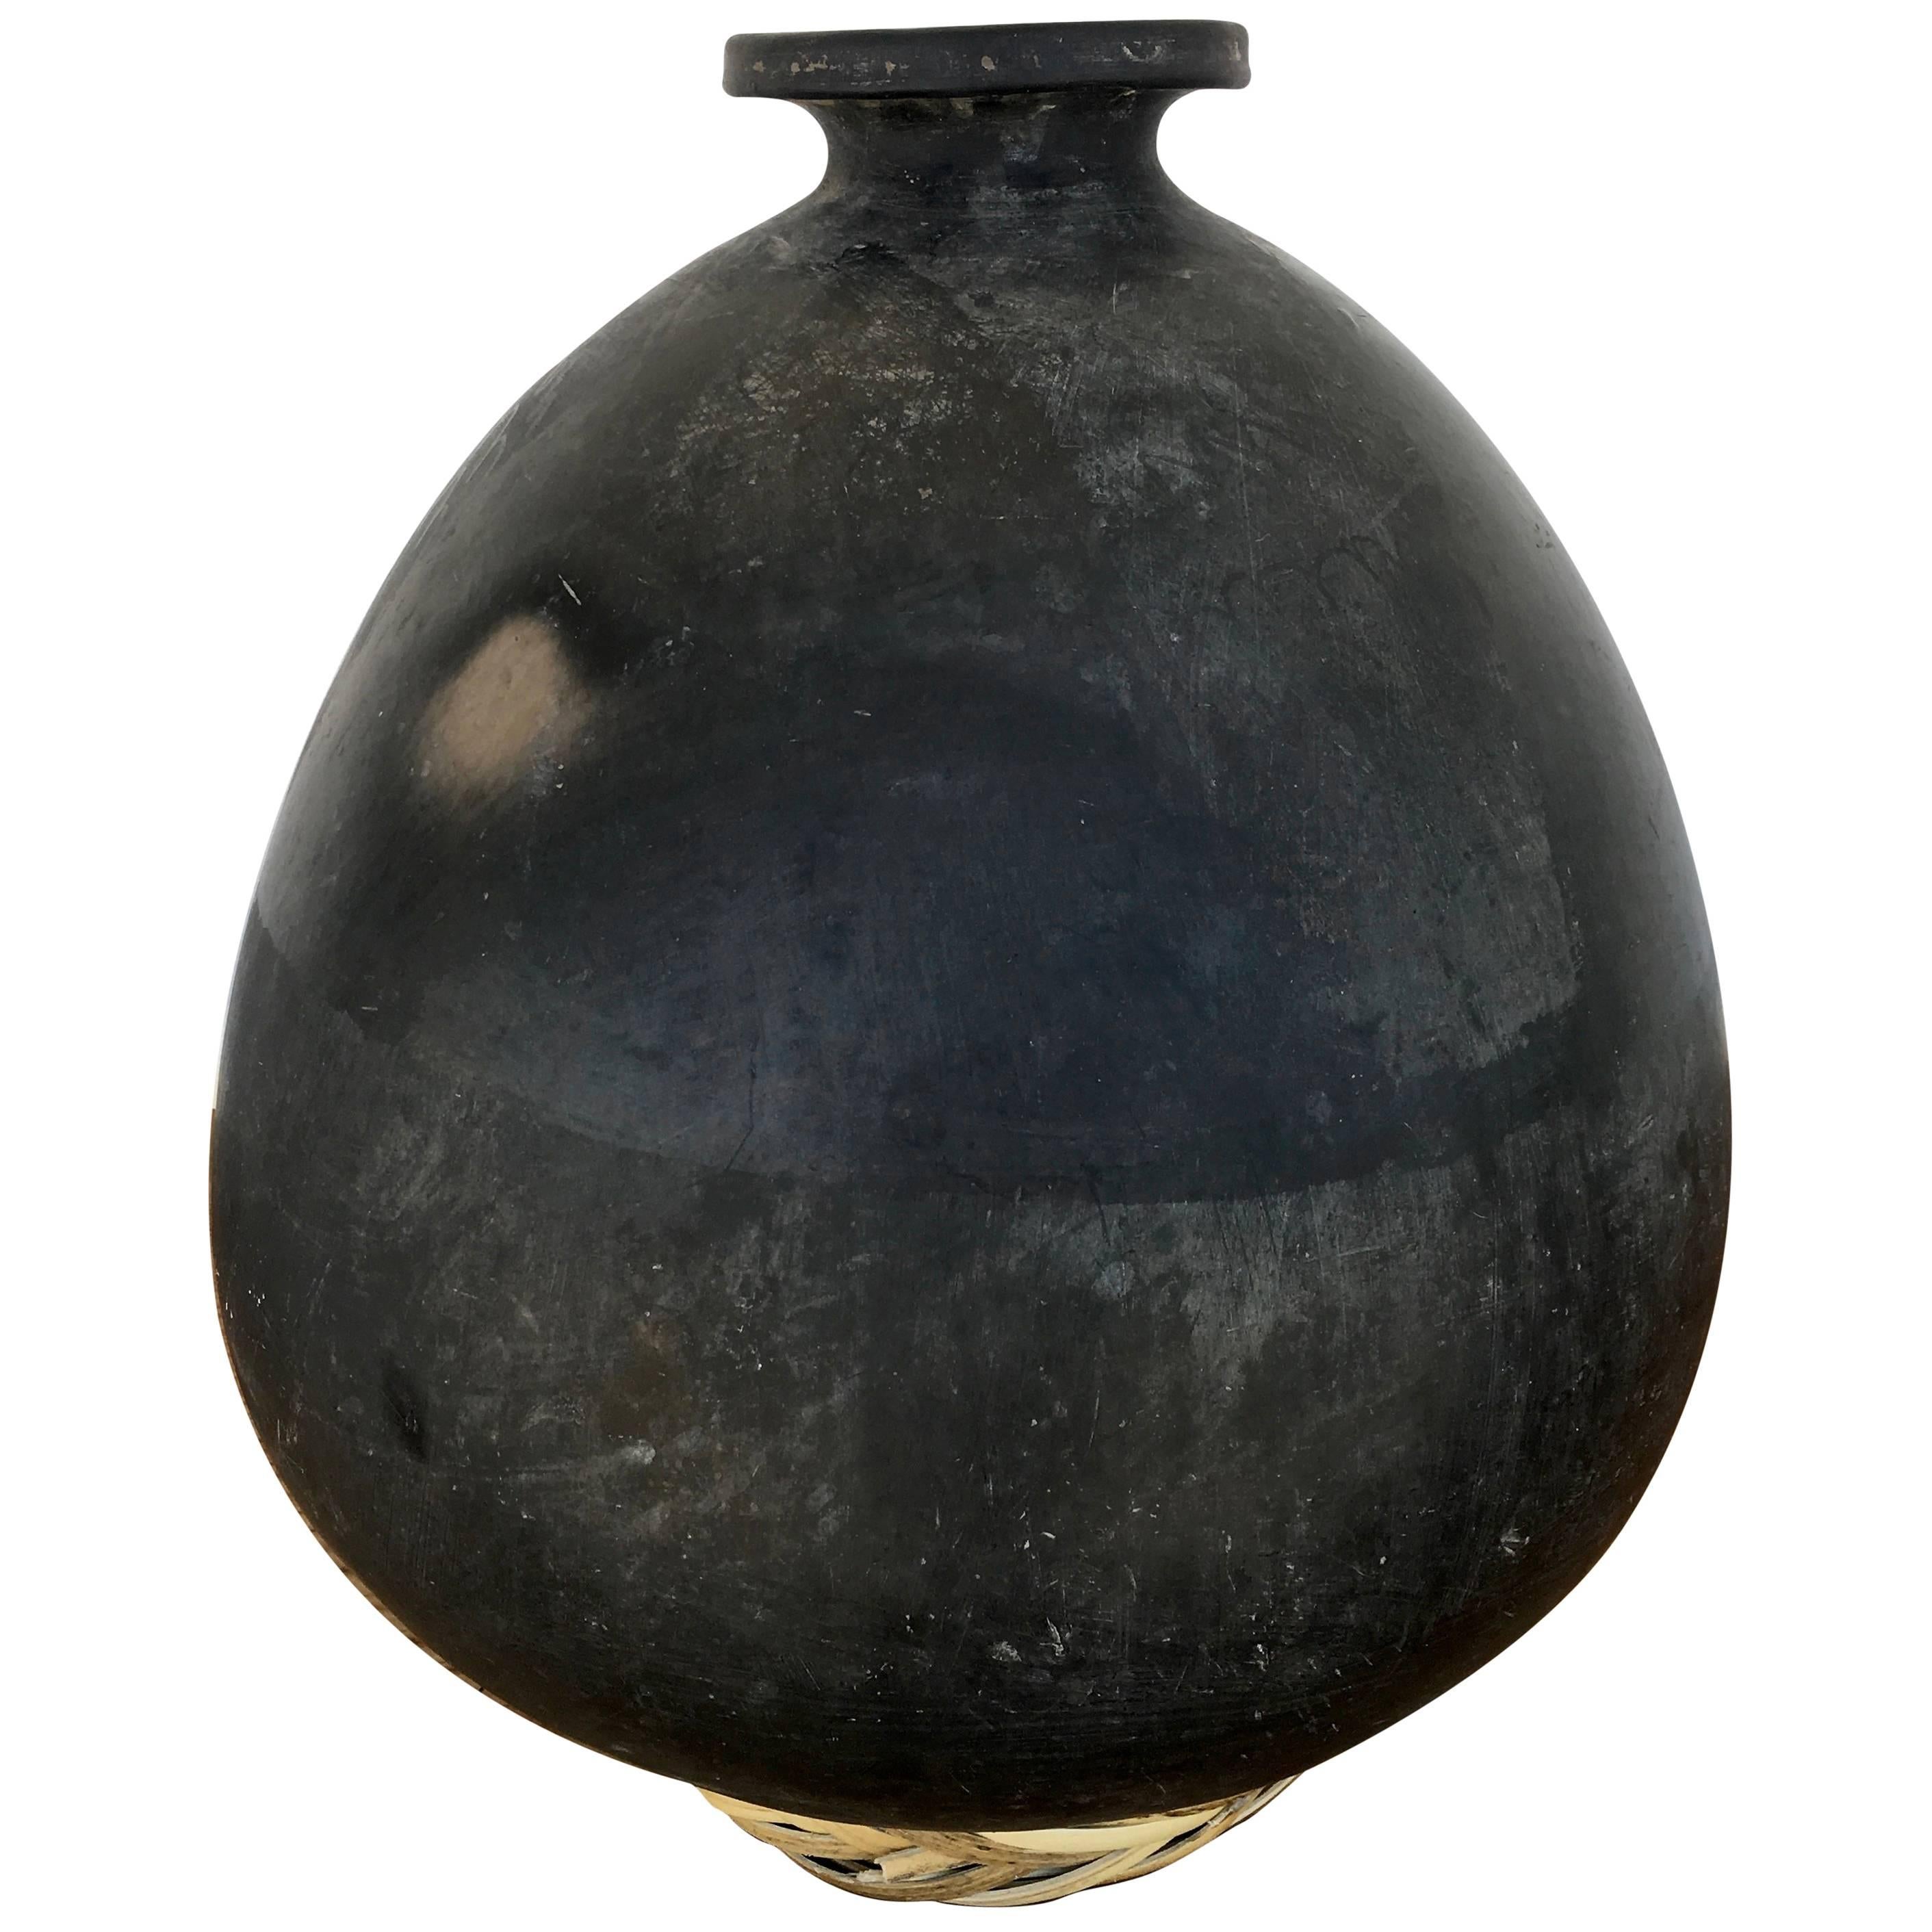 Ceramic Jug Used for Housing Mezcal from Oaxaca, Mexico